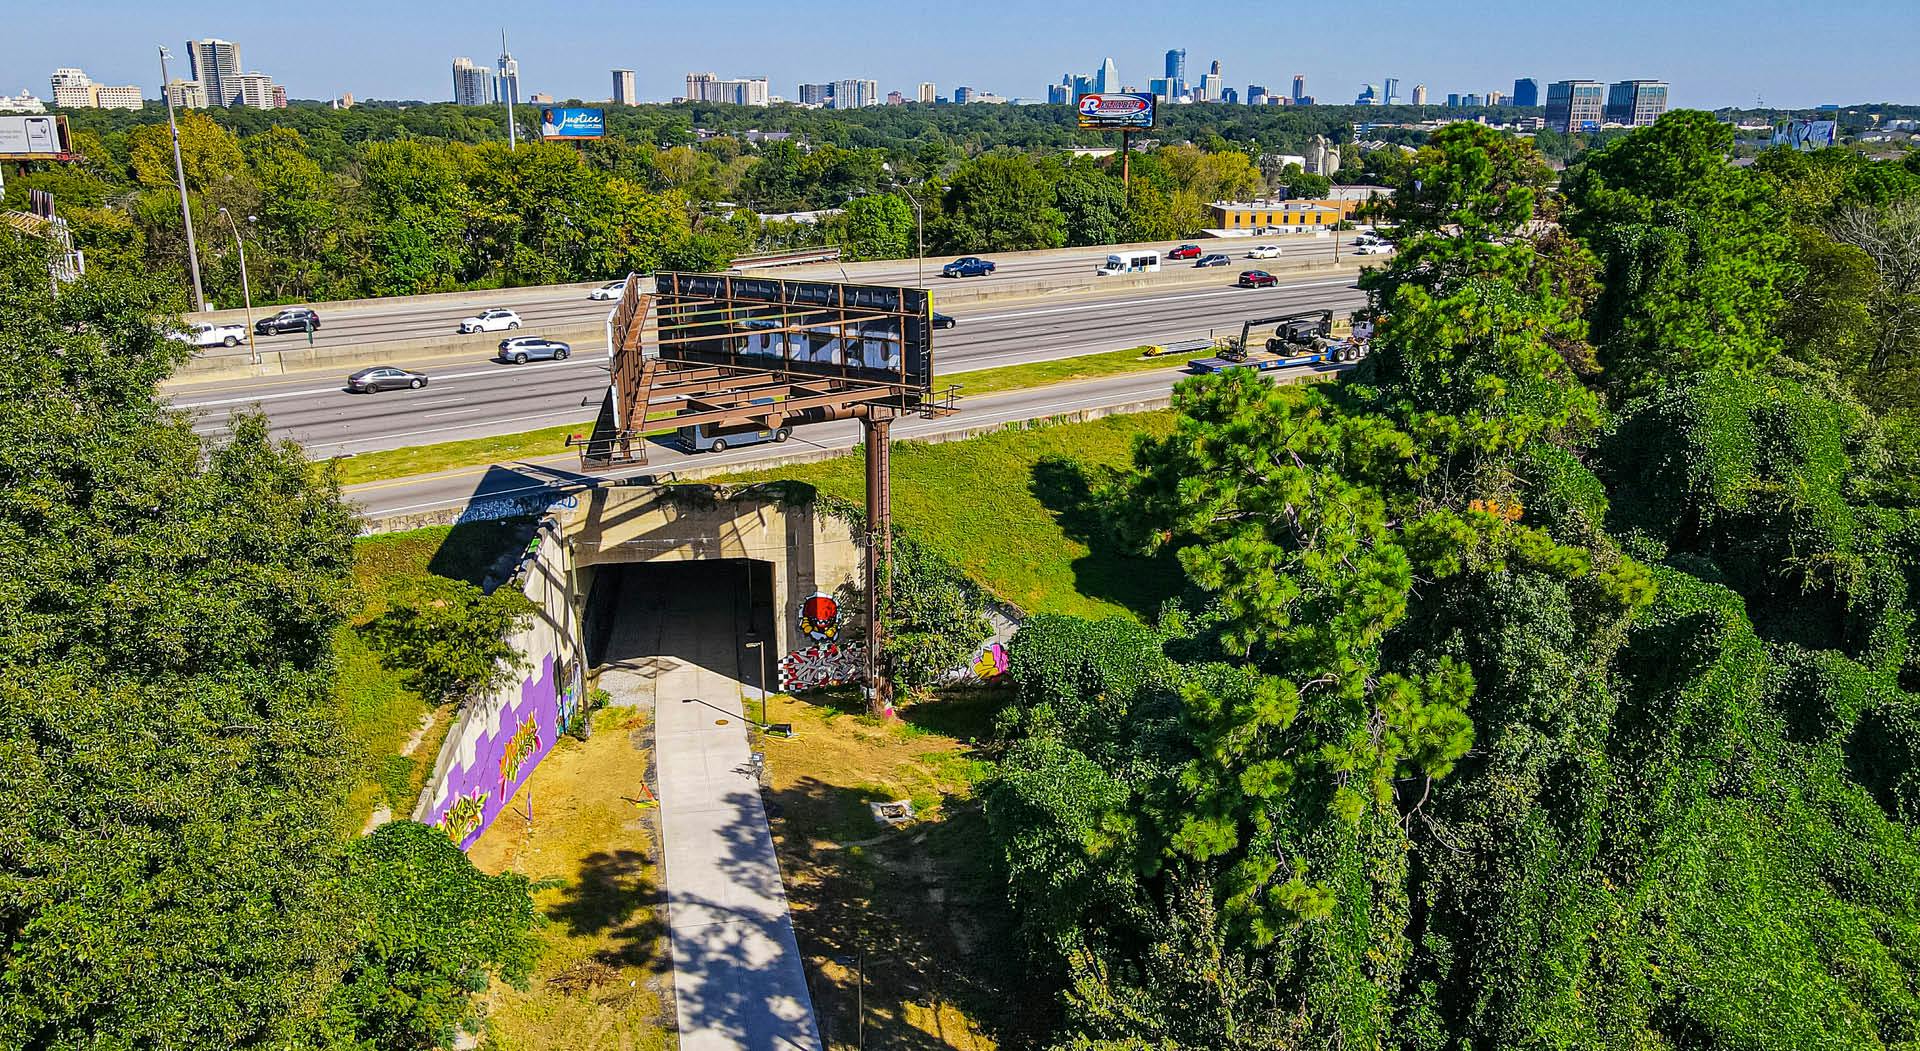 A bird's eye view of the Northeast Trail as it passes under I-85 with the Atlanta skyline in the distance. (Photo Credit: Erin Sintos)